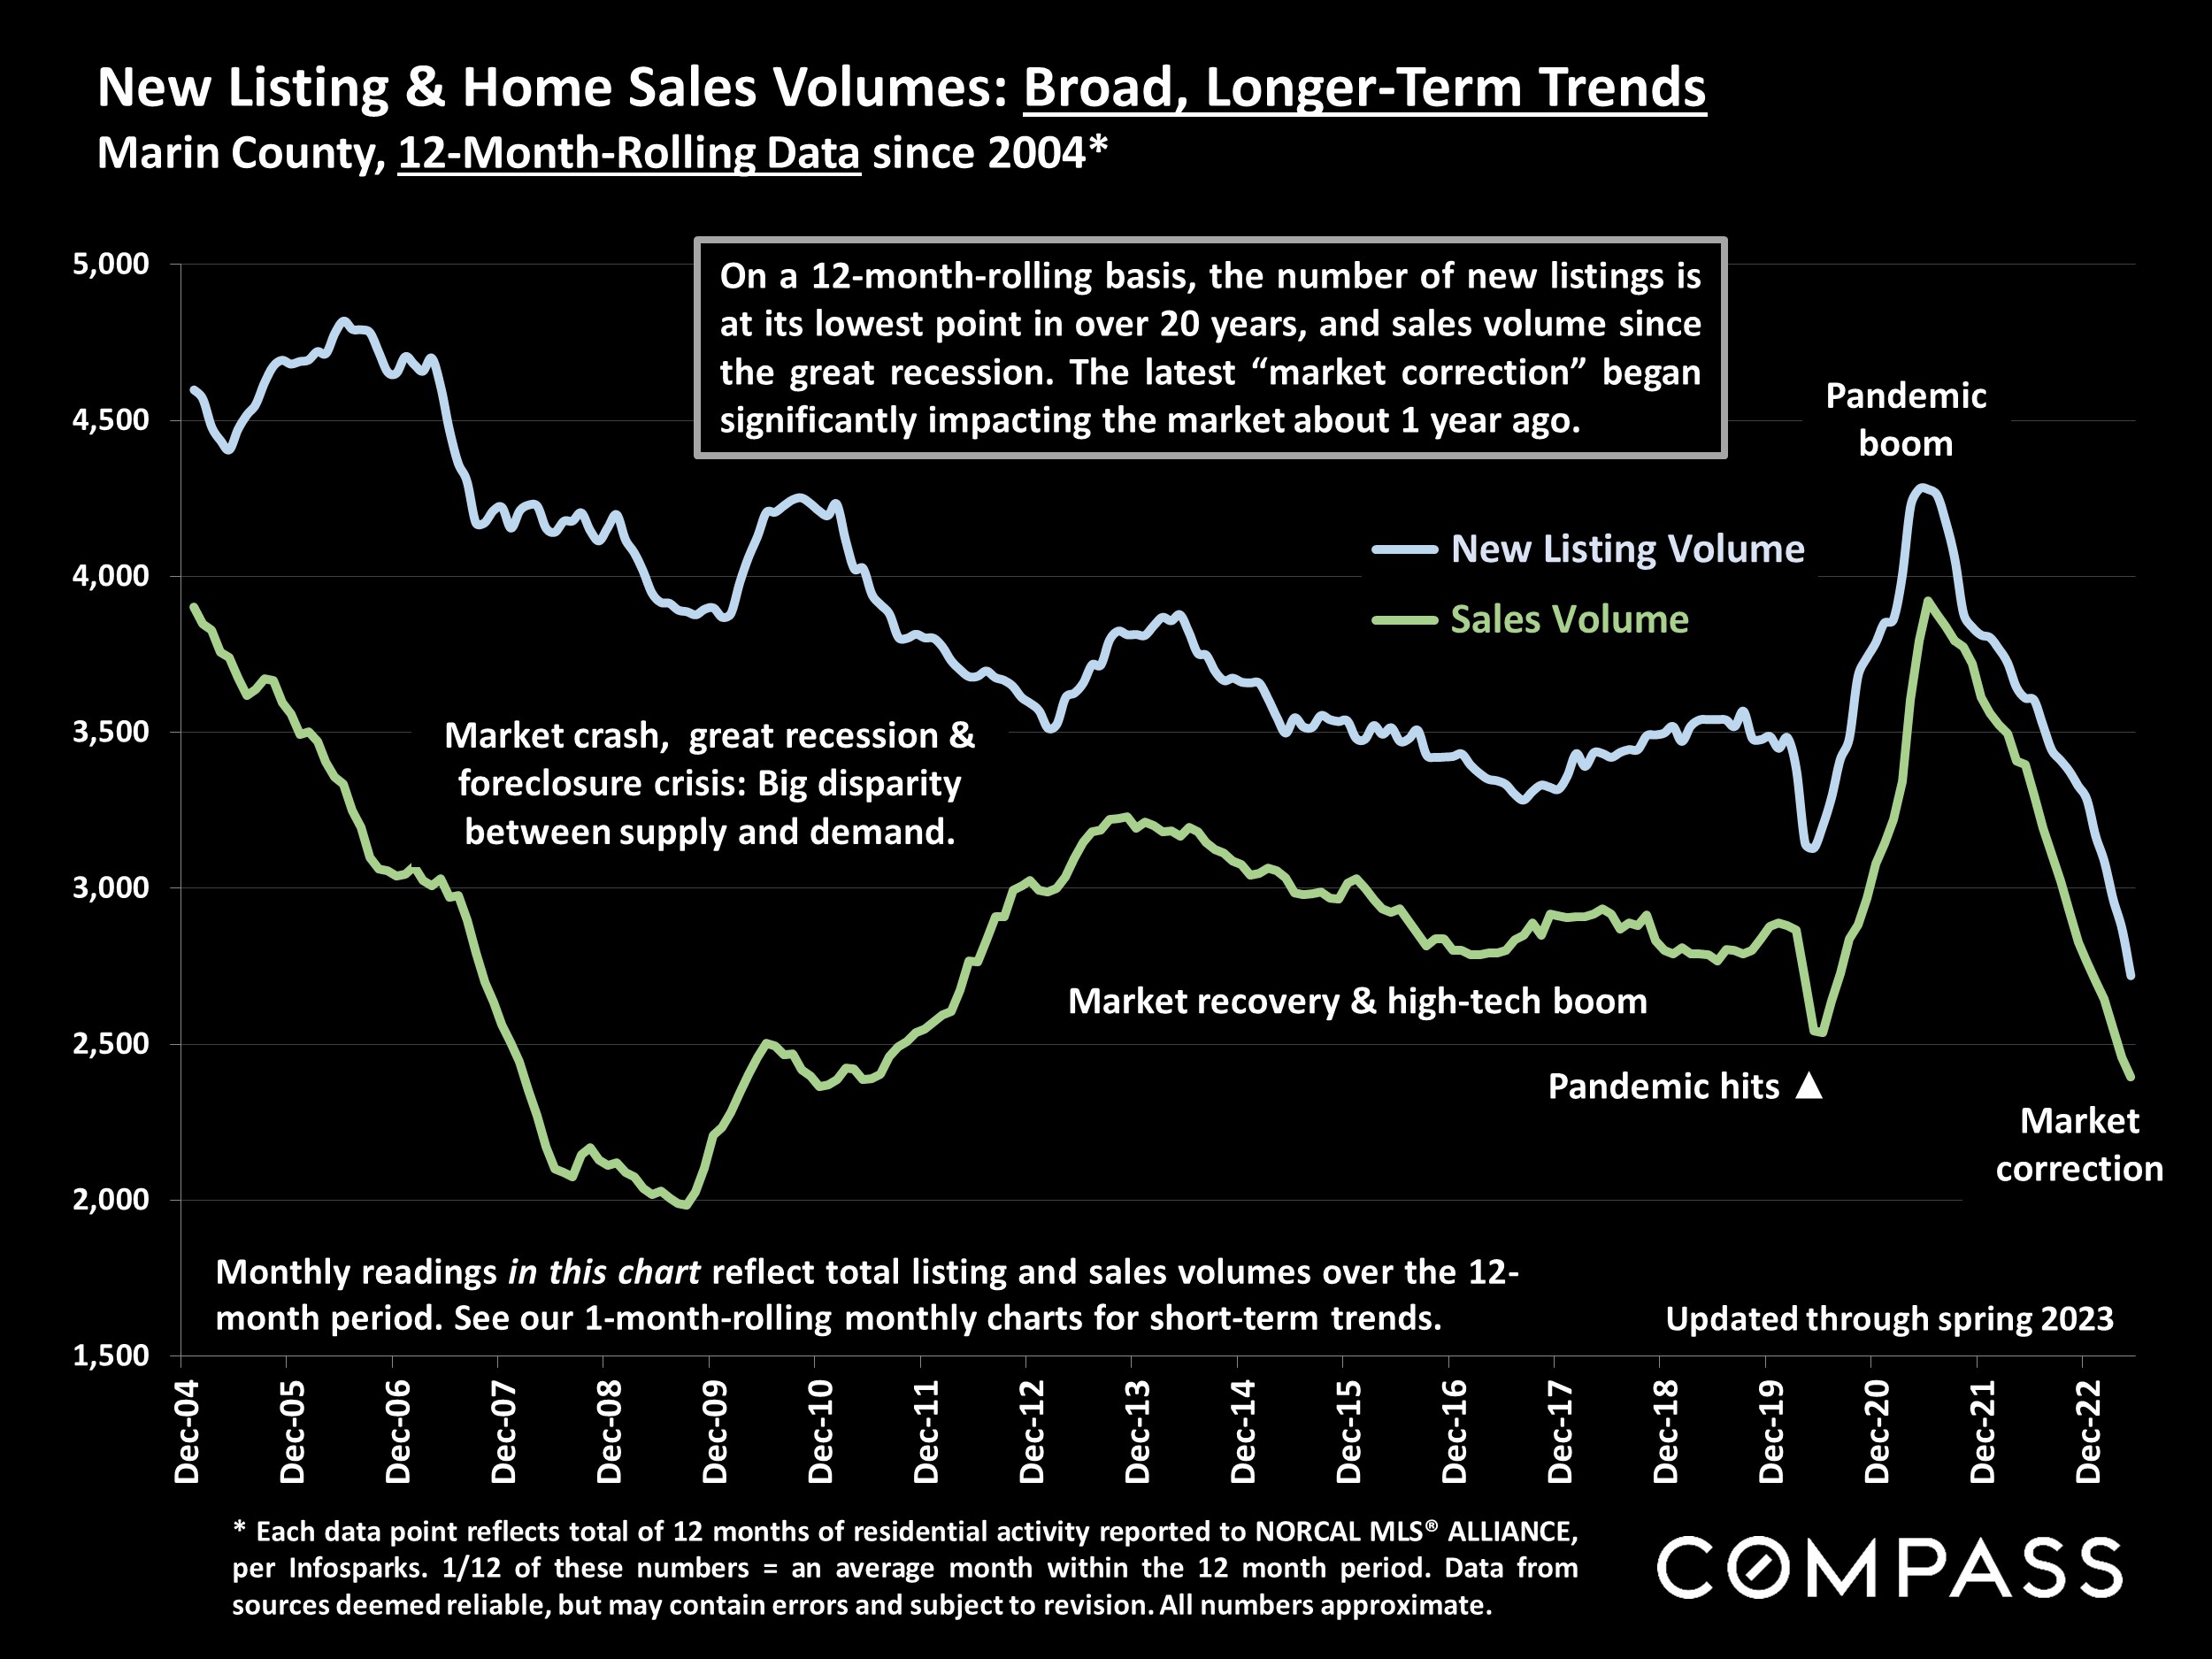 New Listing & Home Sales Volumes: Broad, Longer-Term Trends